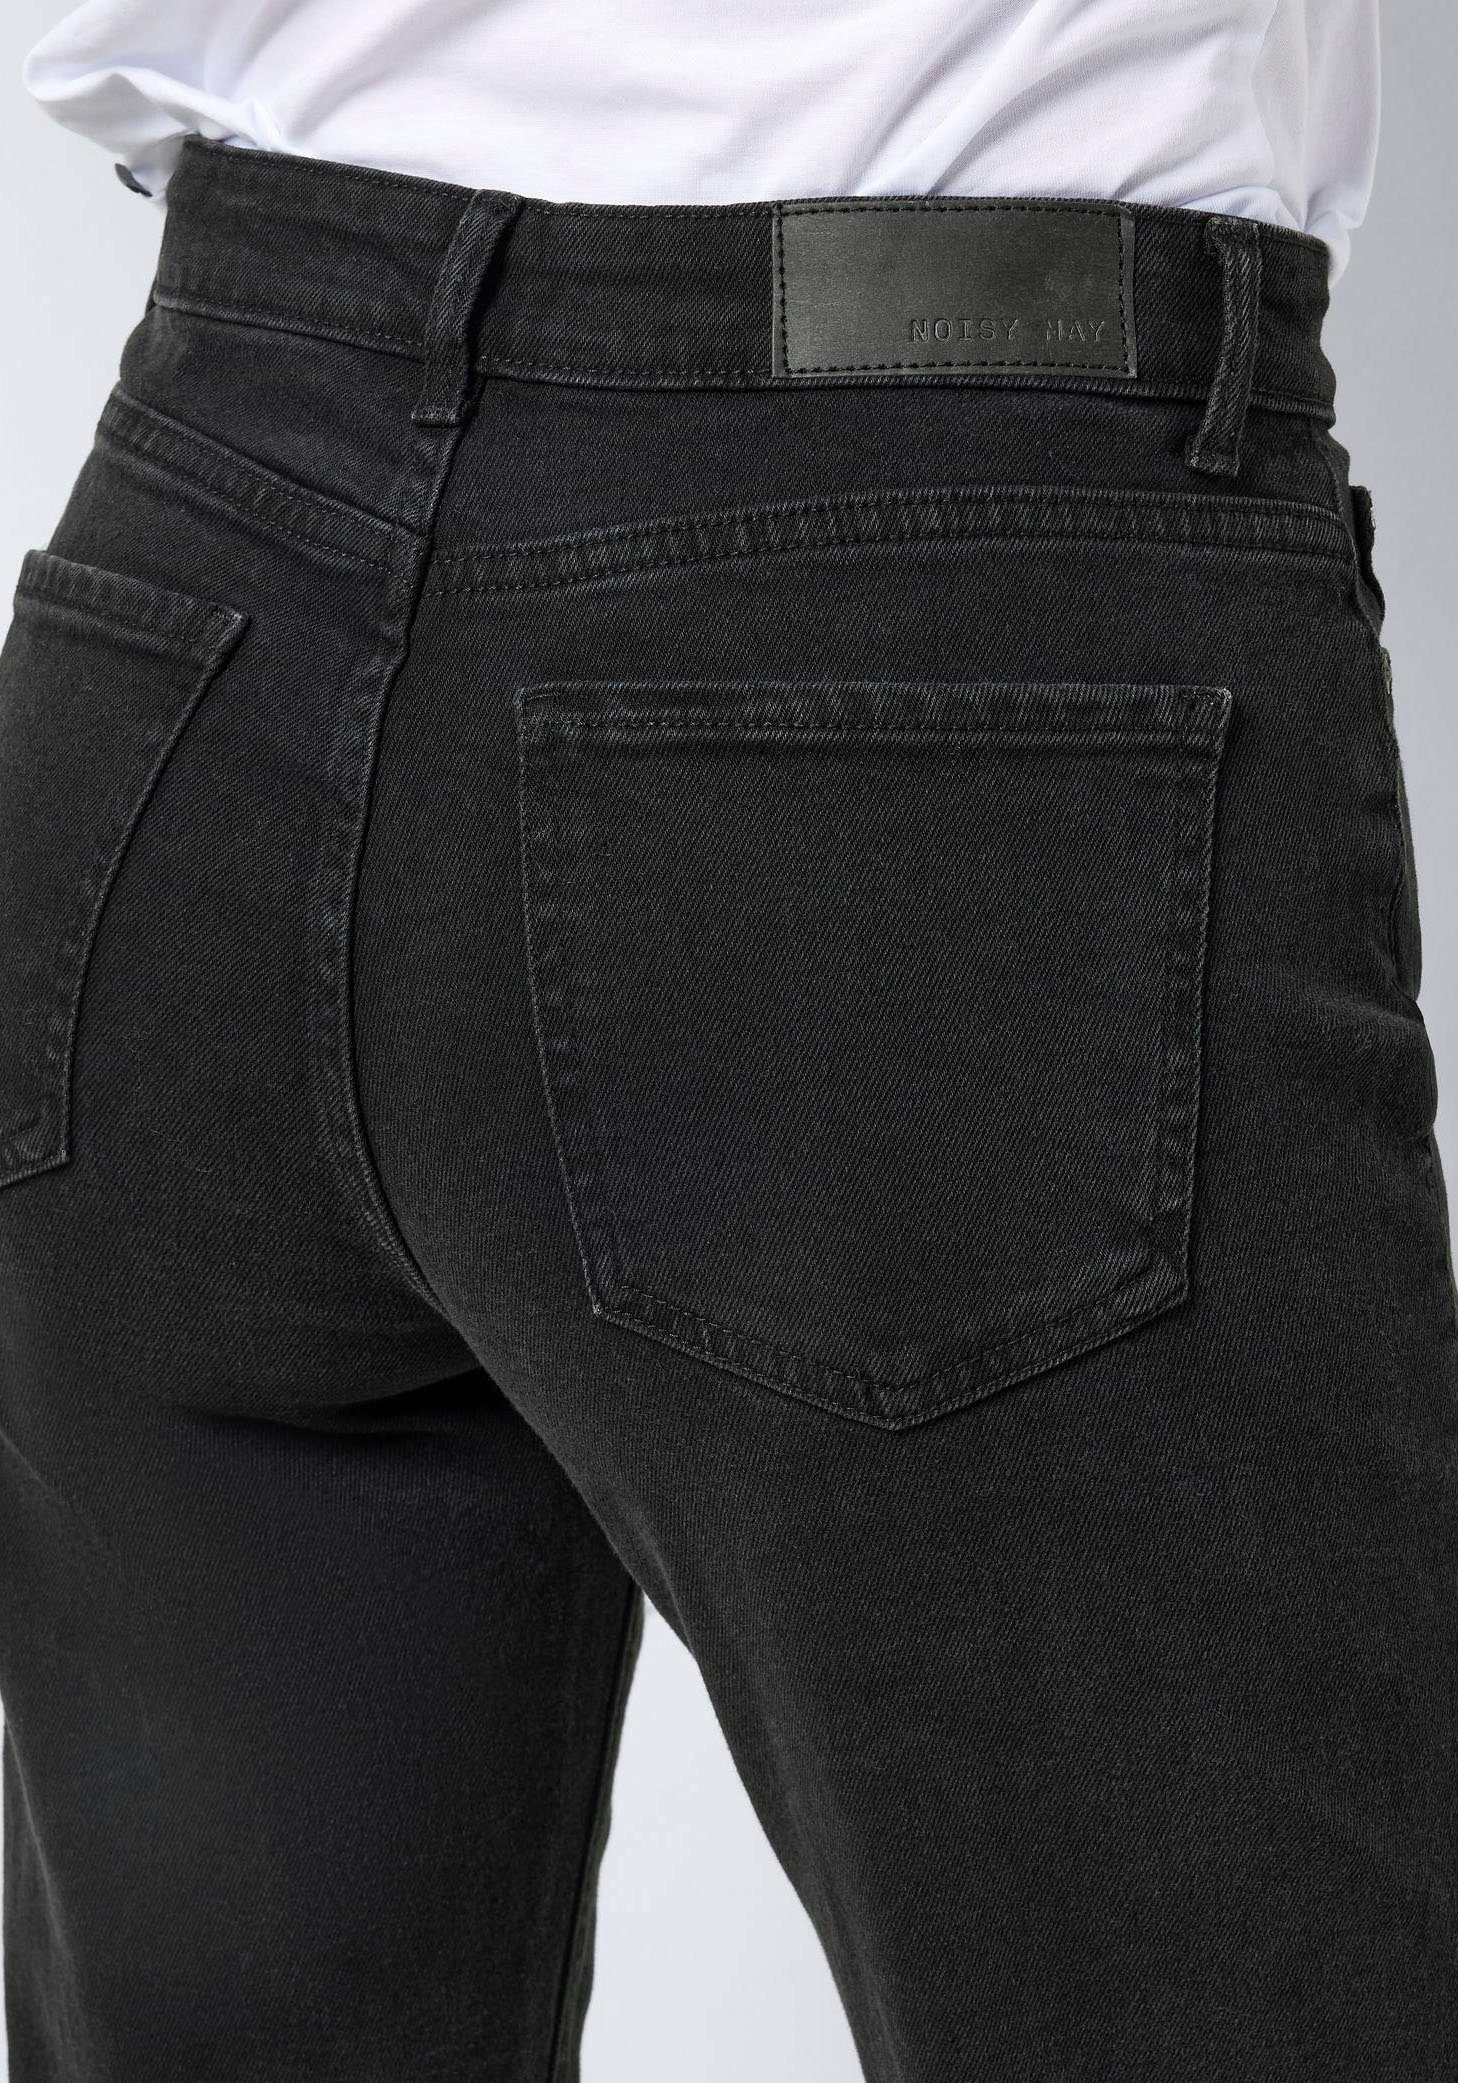 ANK Straight-Jeans mit BLACK may offenem Noisy HW Saum NOOS JEANS NMMONI STRAIGHT